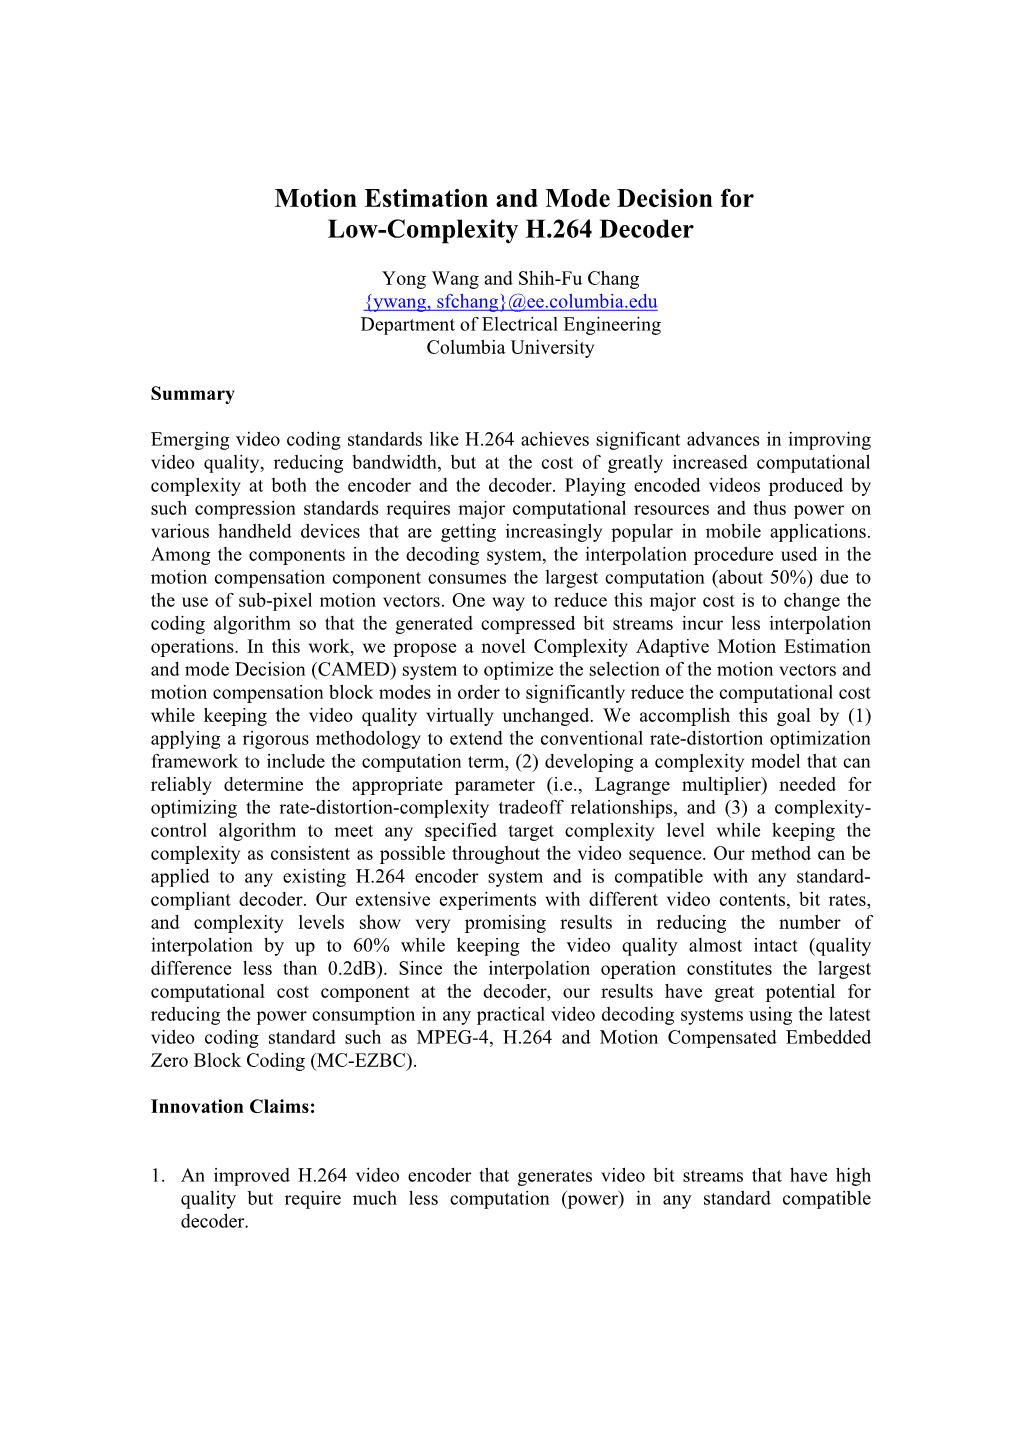 Motion Estimation and Mode Decision for Low-Complexity H.264 Decoder